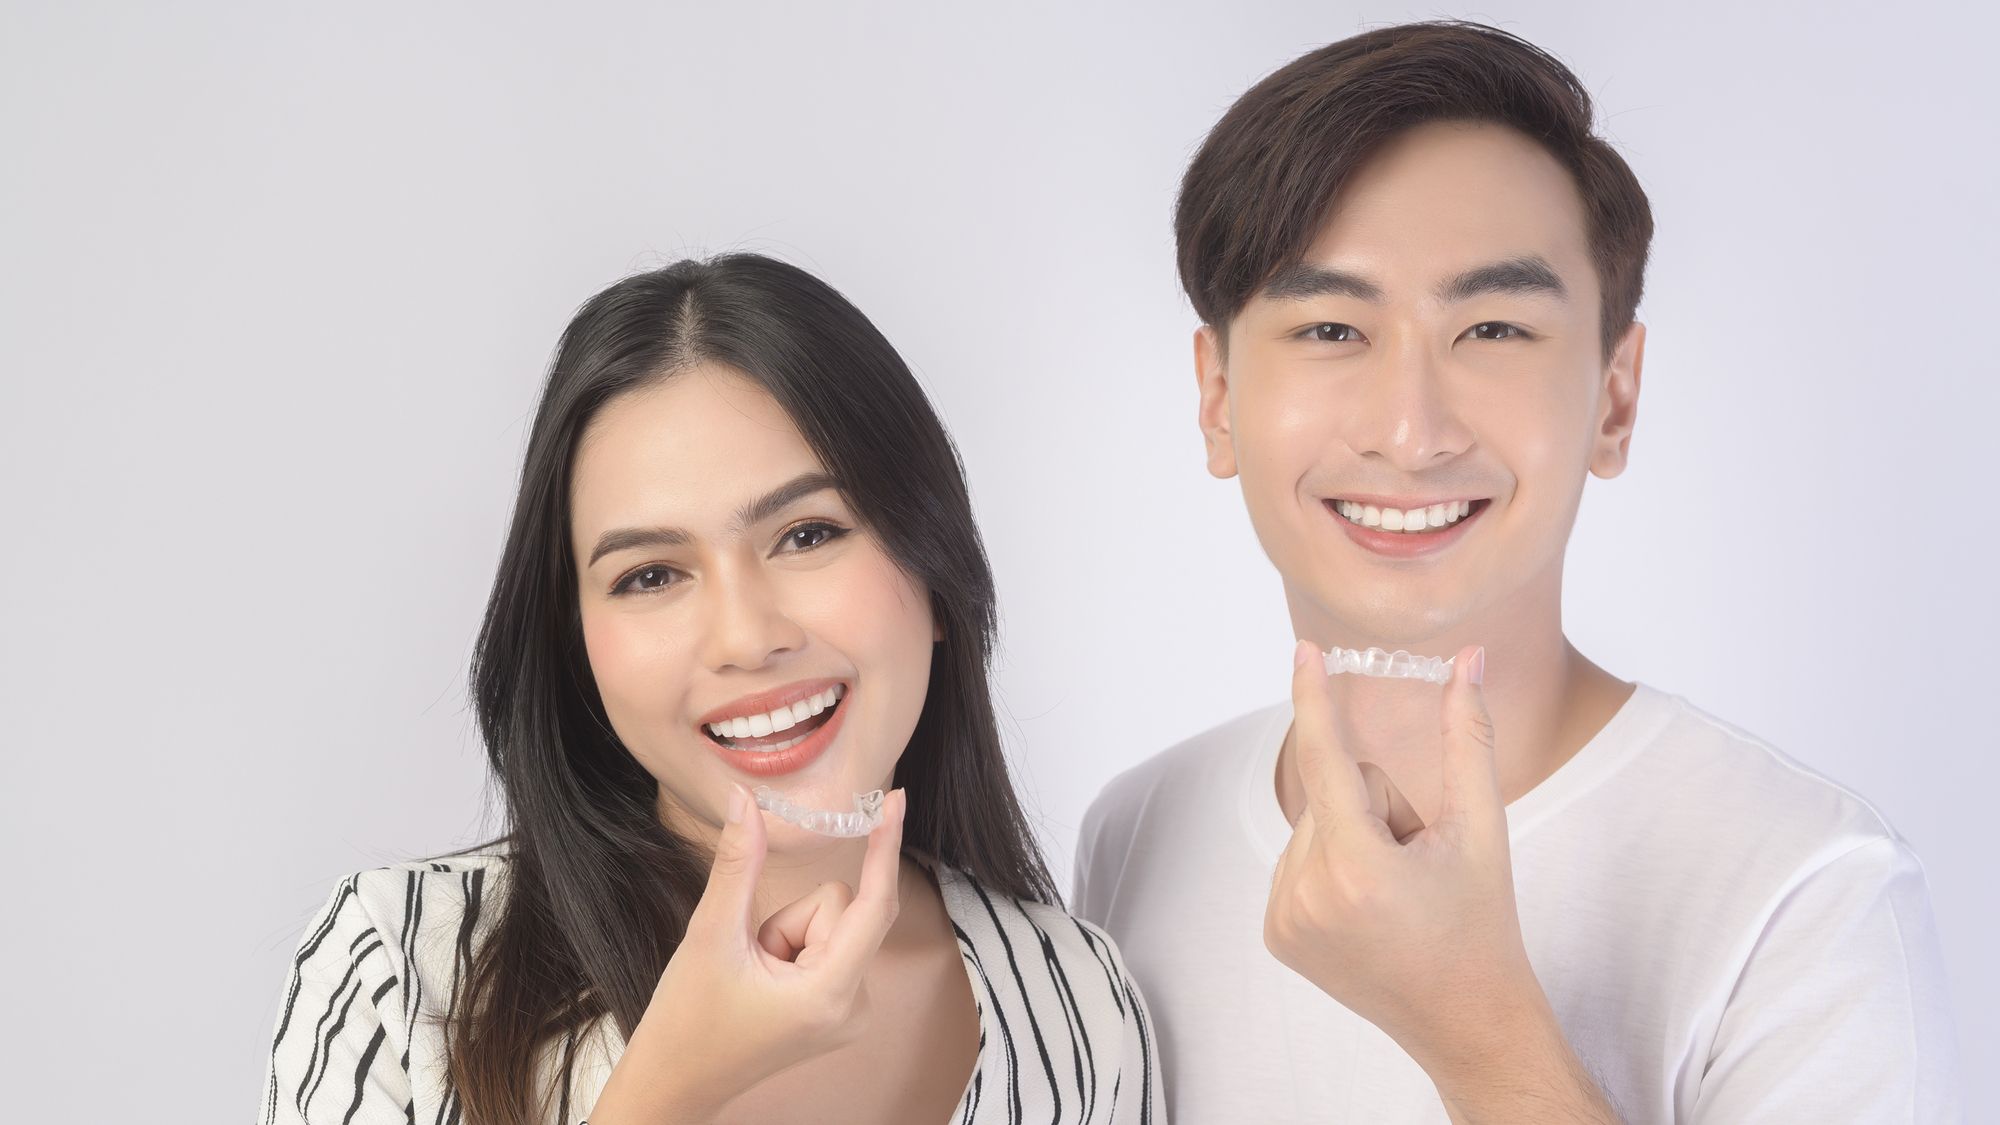 Young smiling man amd woman holding invisalign braces over white background studio, cosmetic dentistry and Orthodontic concept.